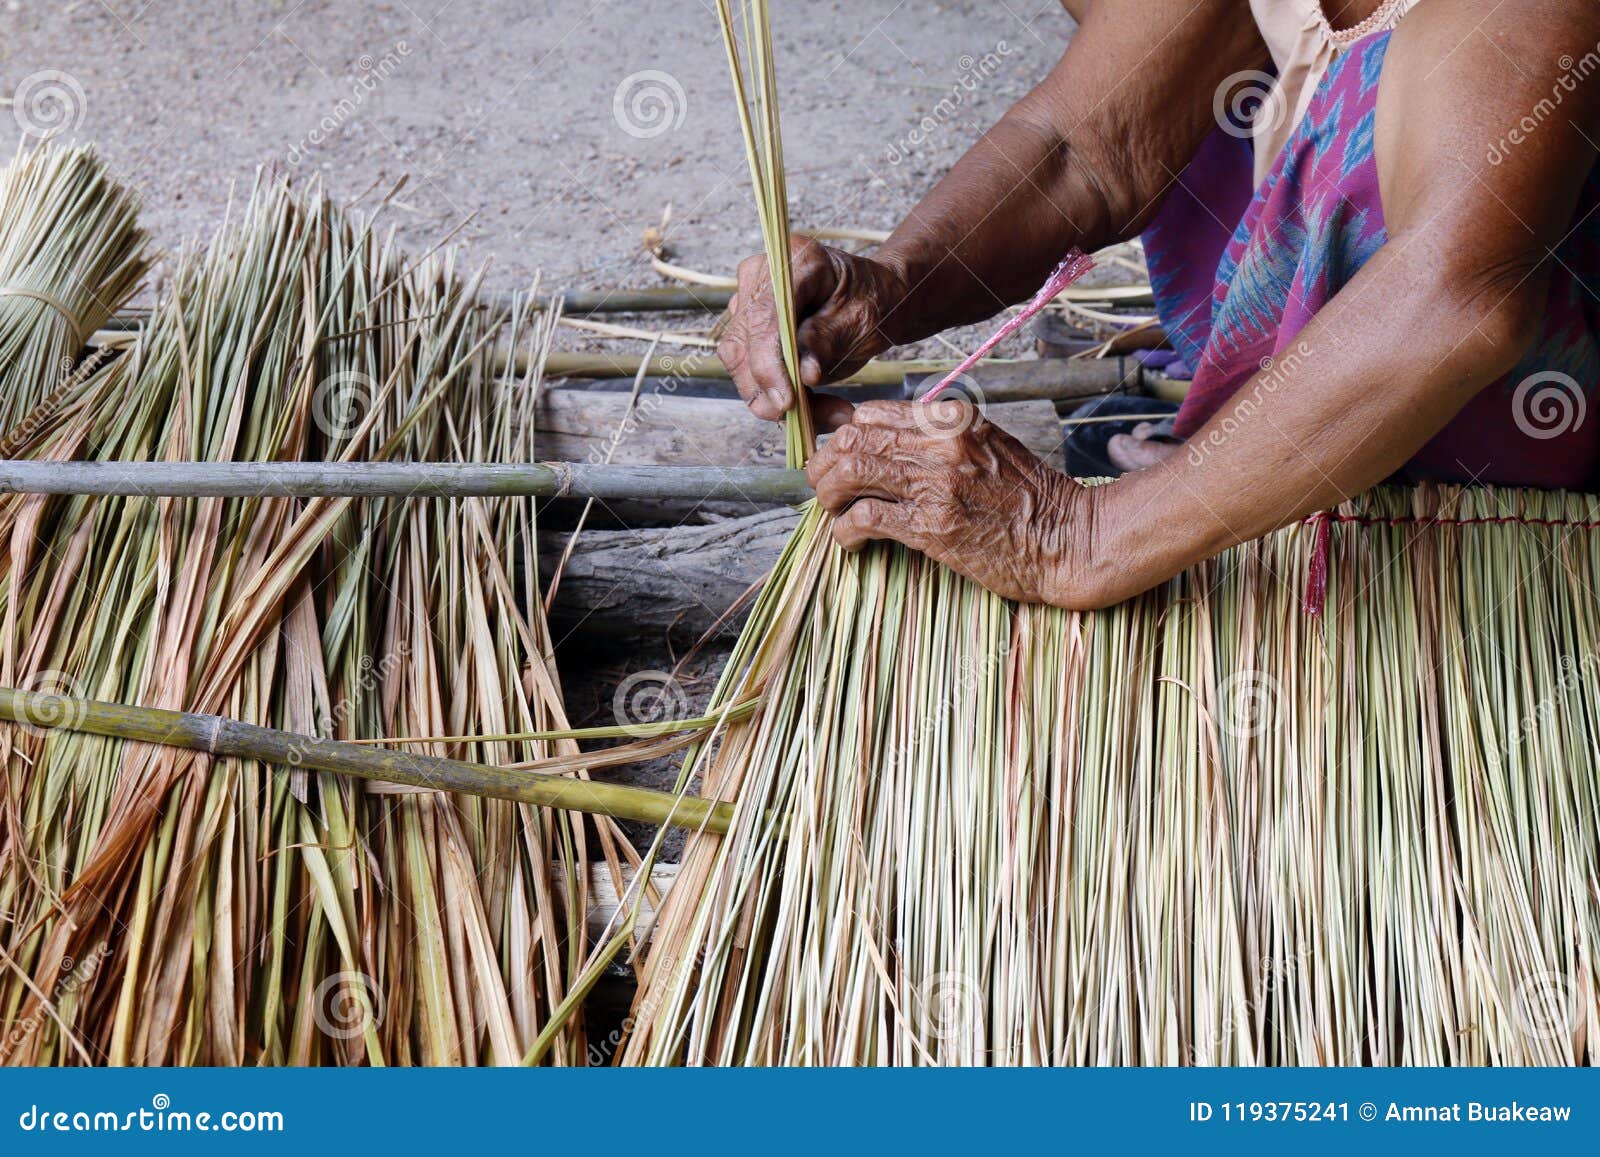 Picture Shows How To Make a Panel Vetiver for Hut Roof, Handwork Crafts ...